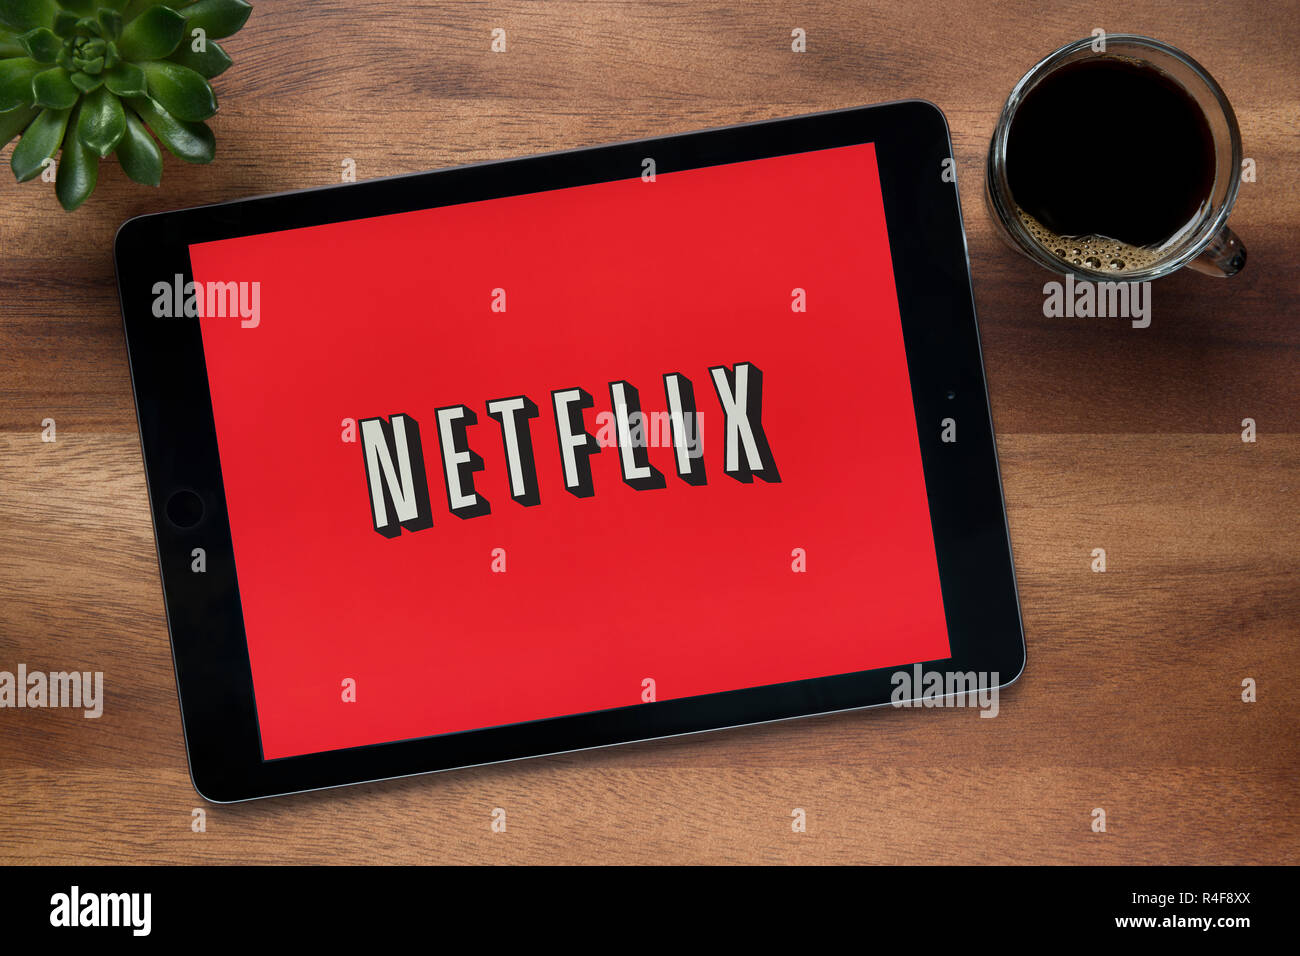 The website of Netflix is seen on an iPad tablet, on a wooden table along with an espresso coffee and a house plant (Editorial use only). Stock Photo